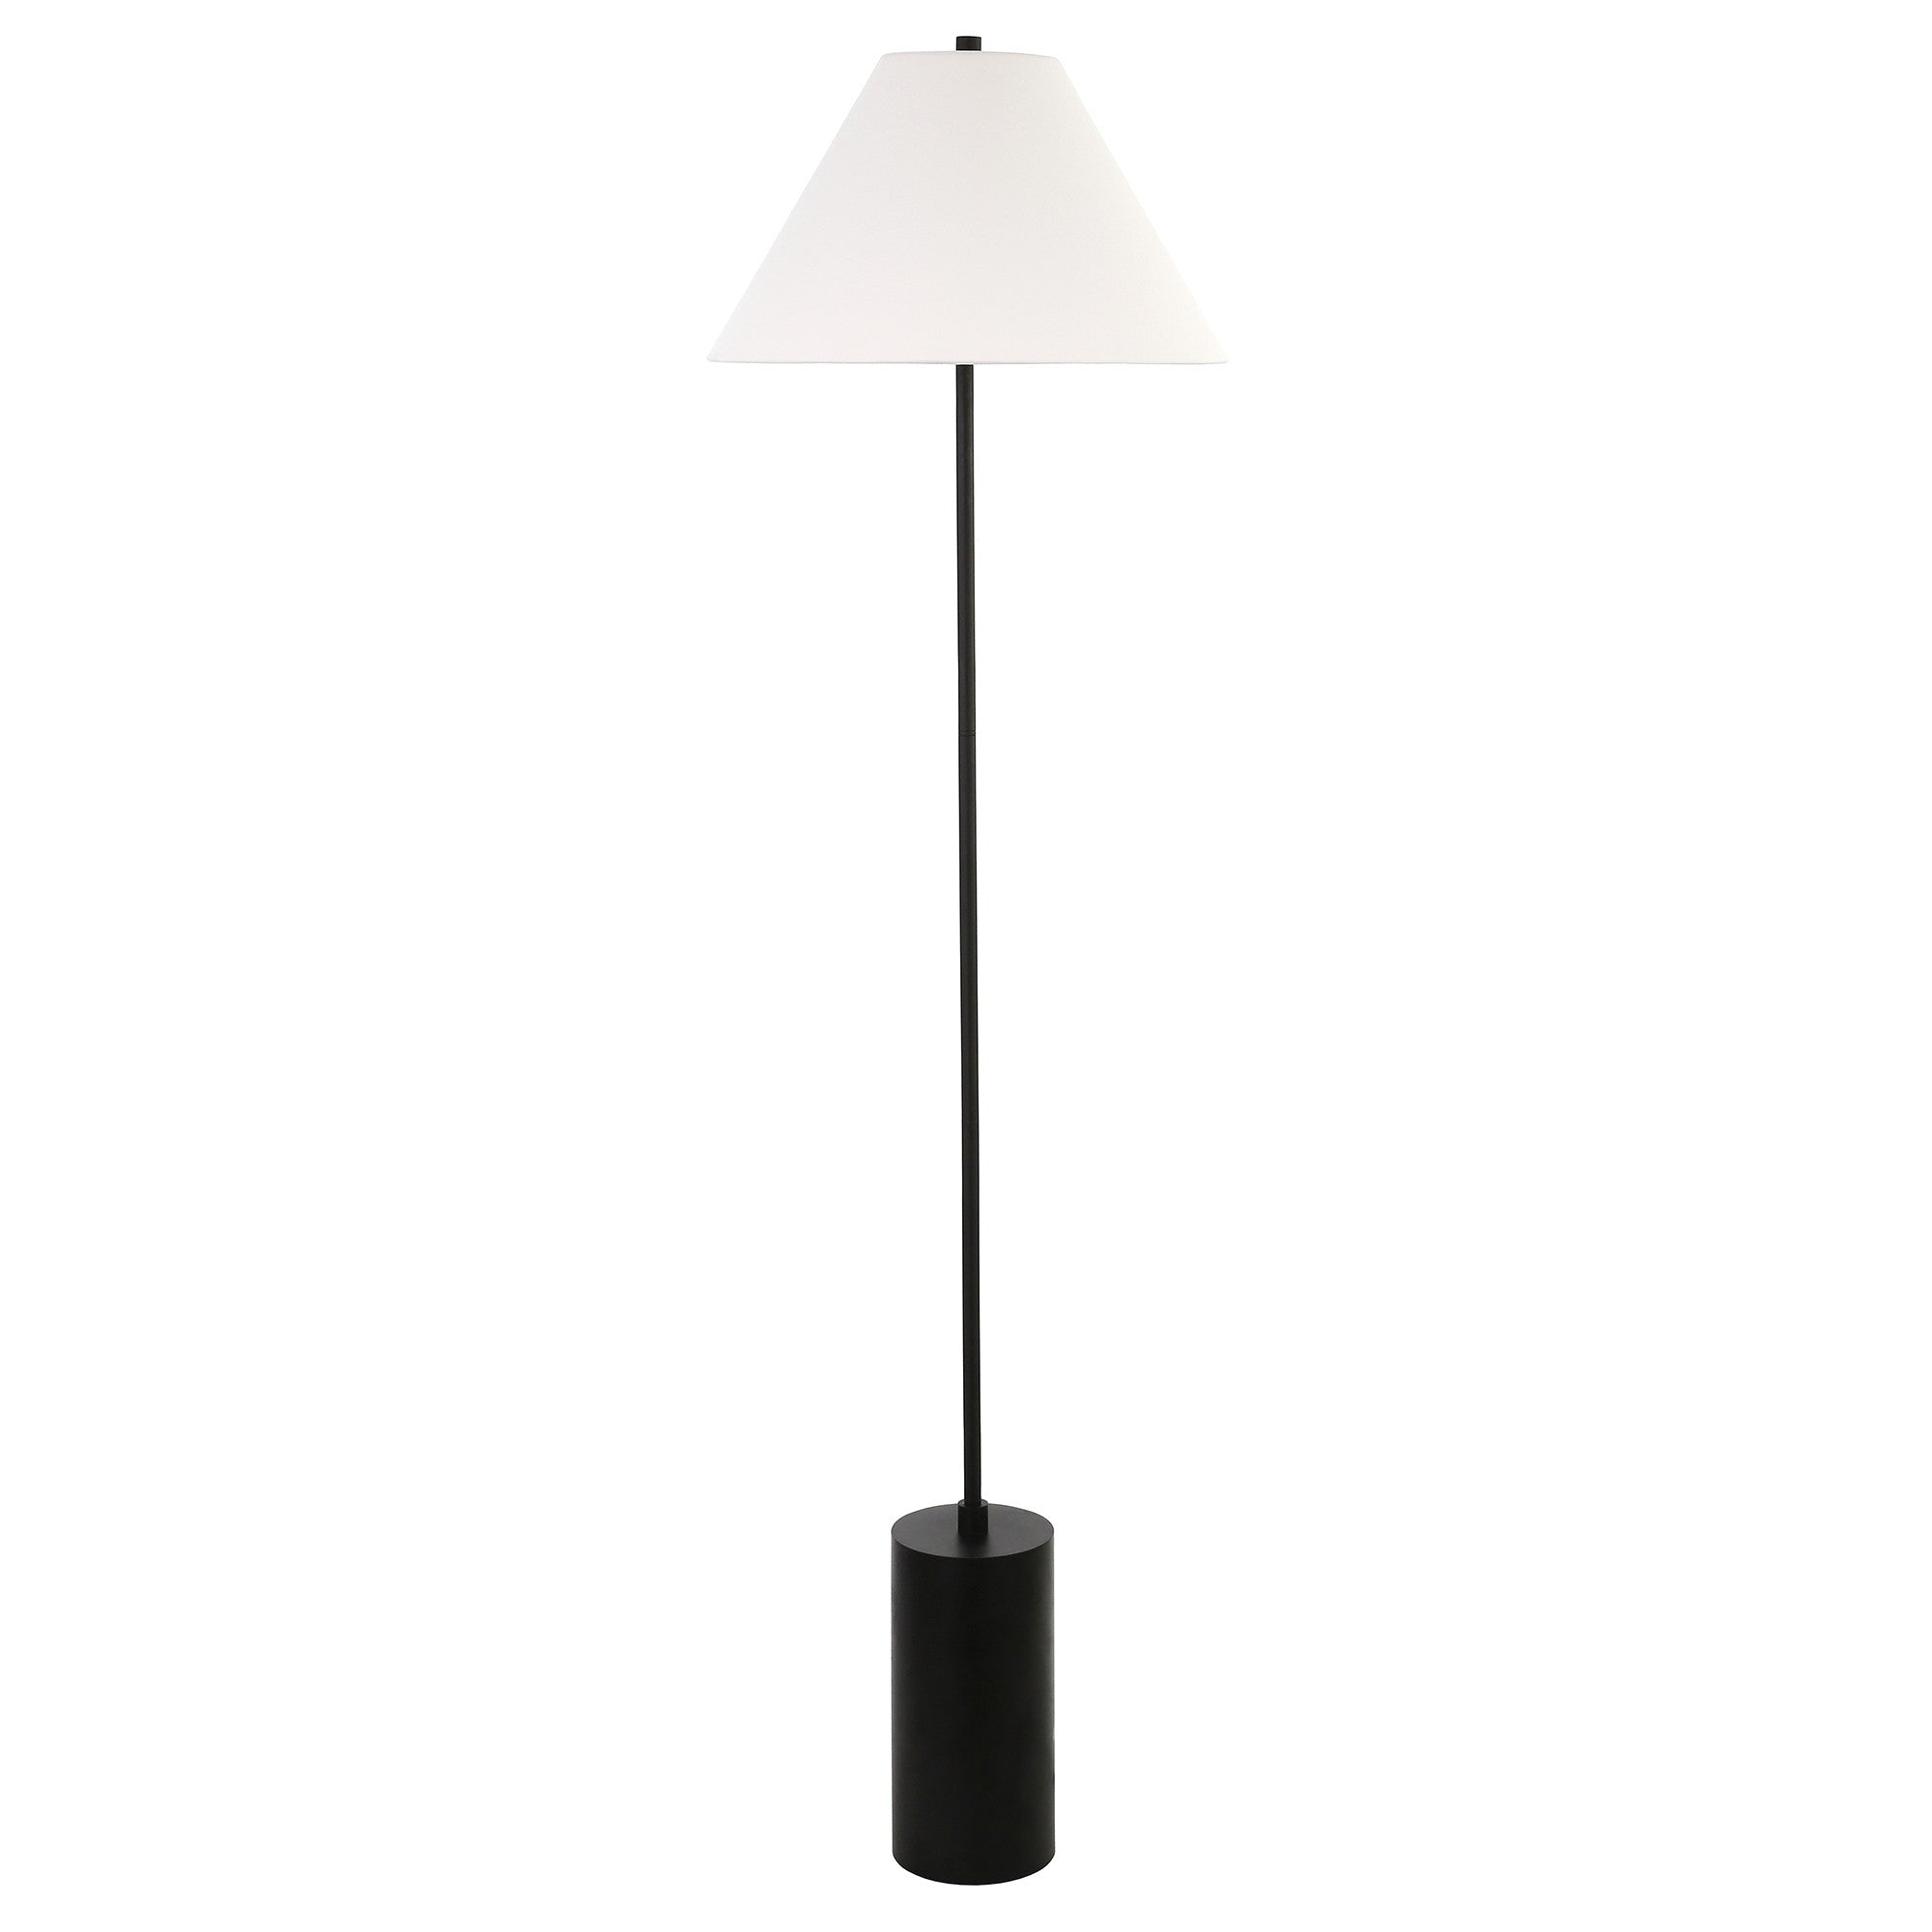 64" Black Traditional Shaped Floor Lamp With White Frosted Glass Empire Shade